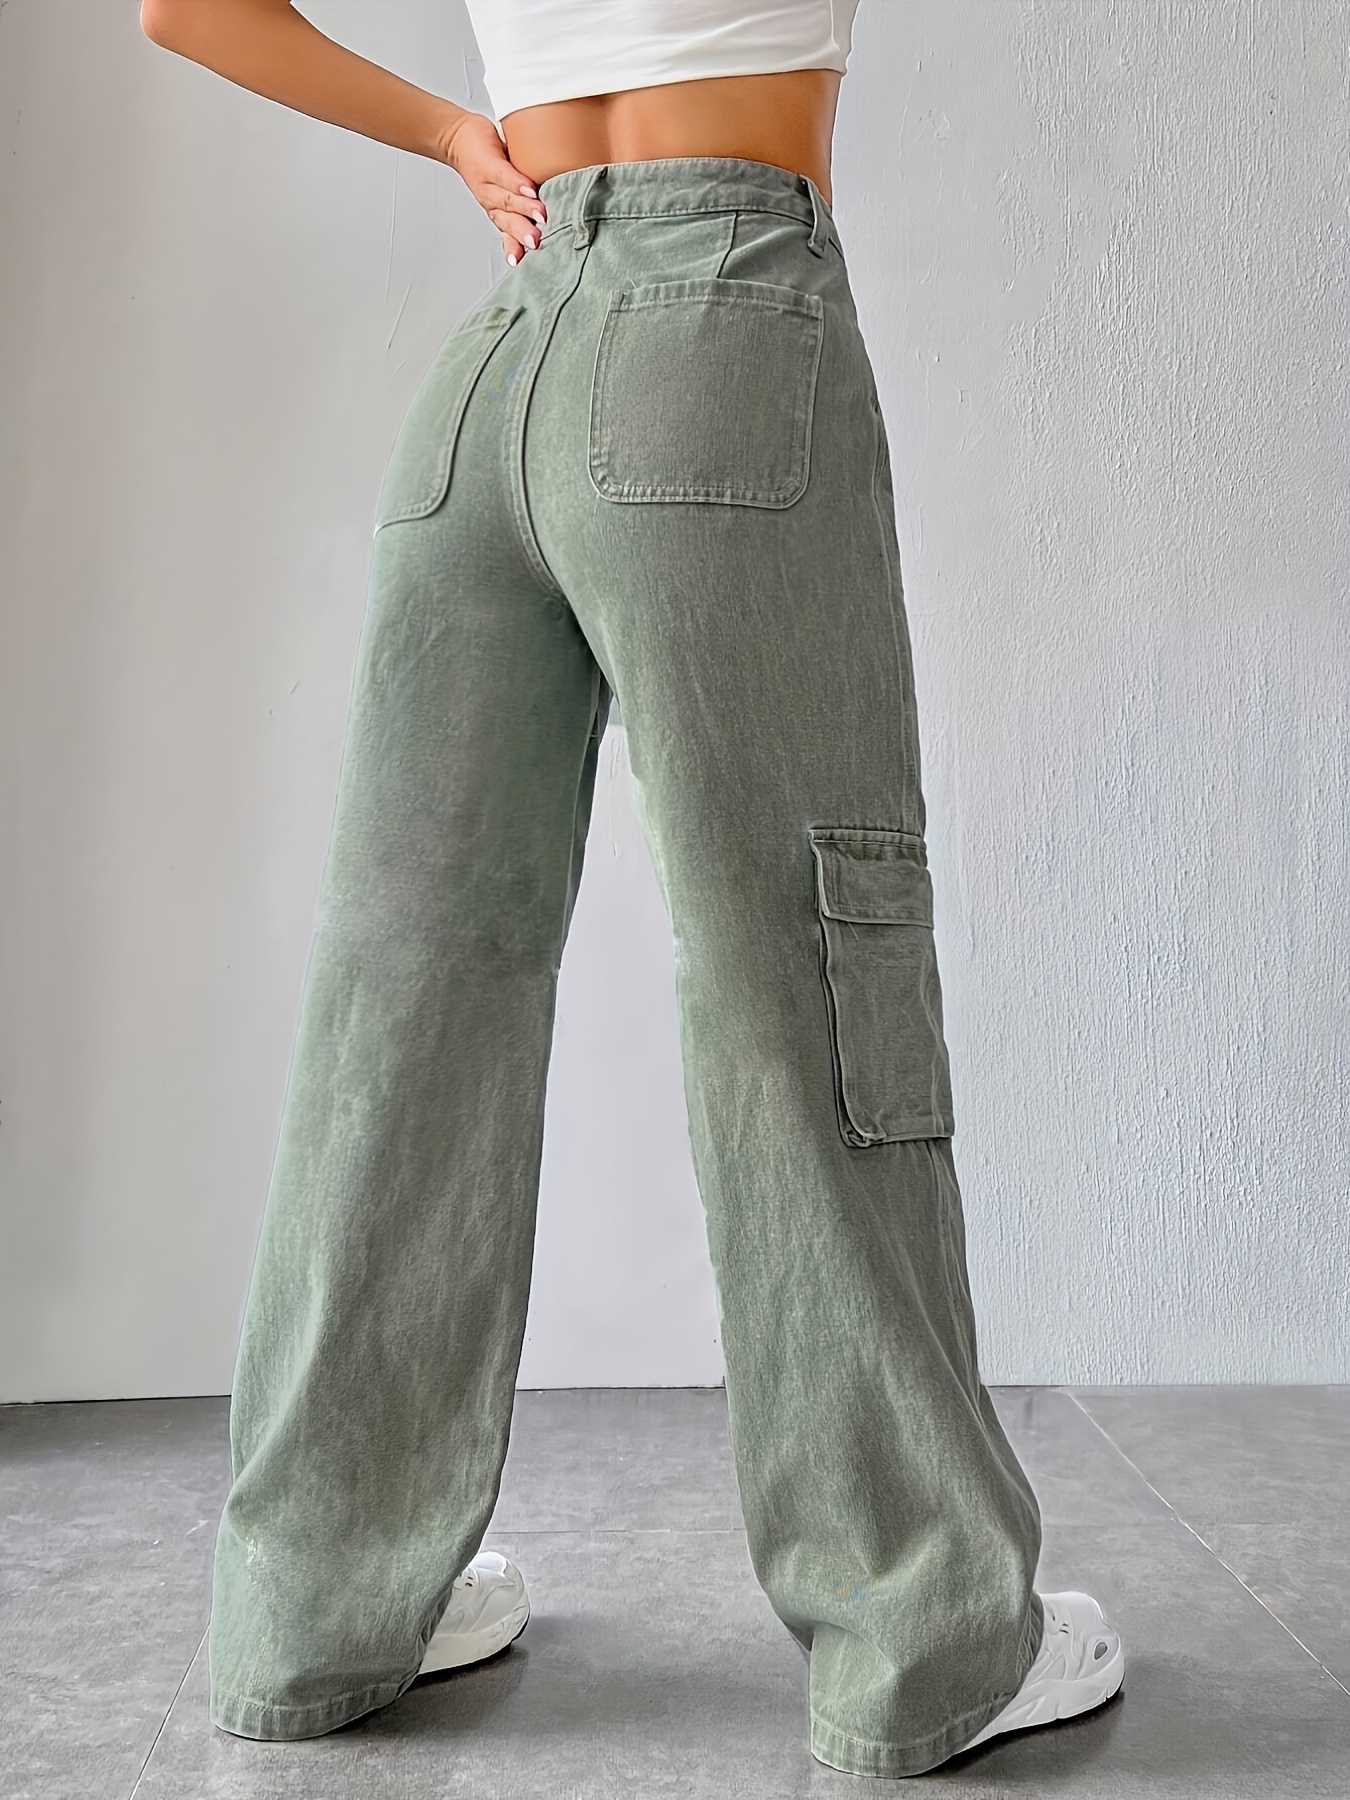 Army Green Cargo Pants Flap Pockets High Waist Loose Fit Non